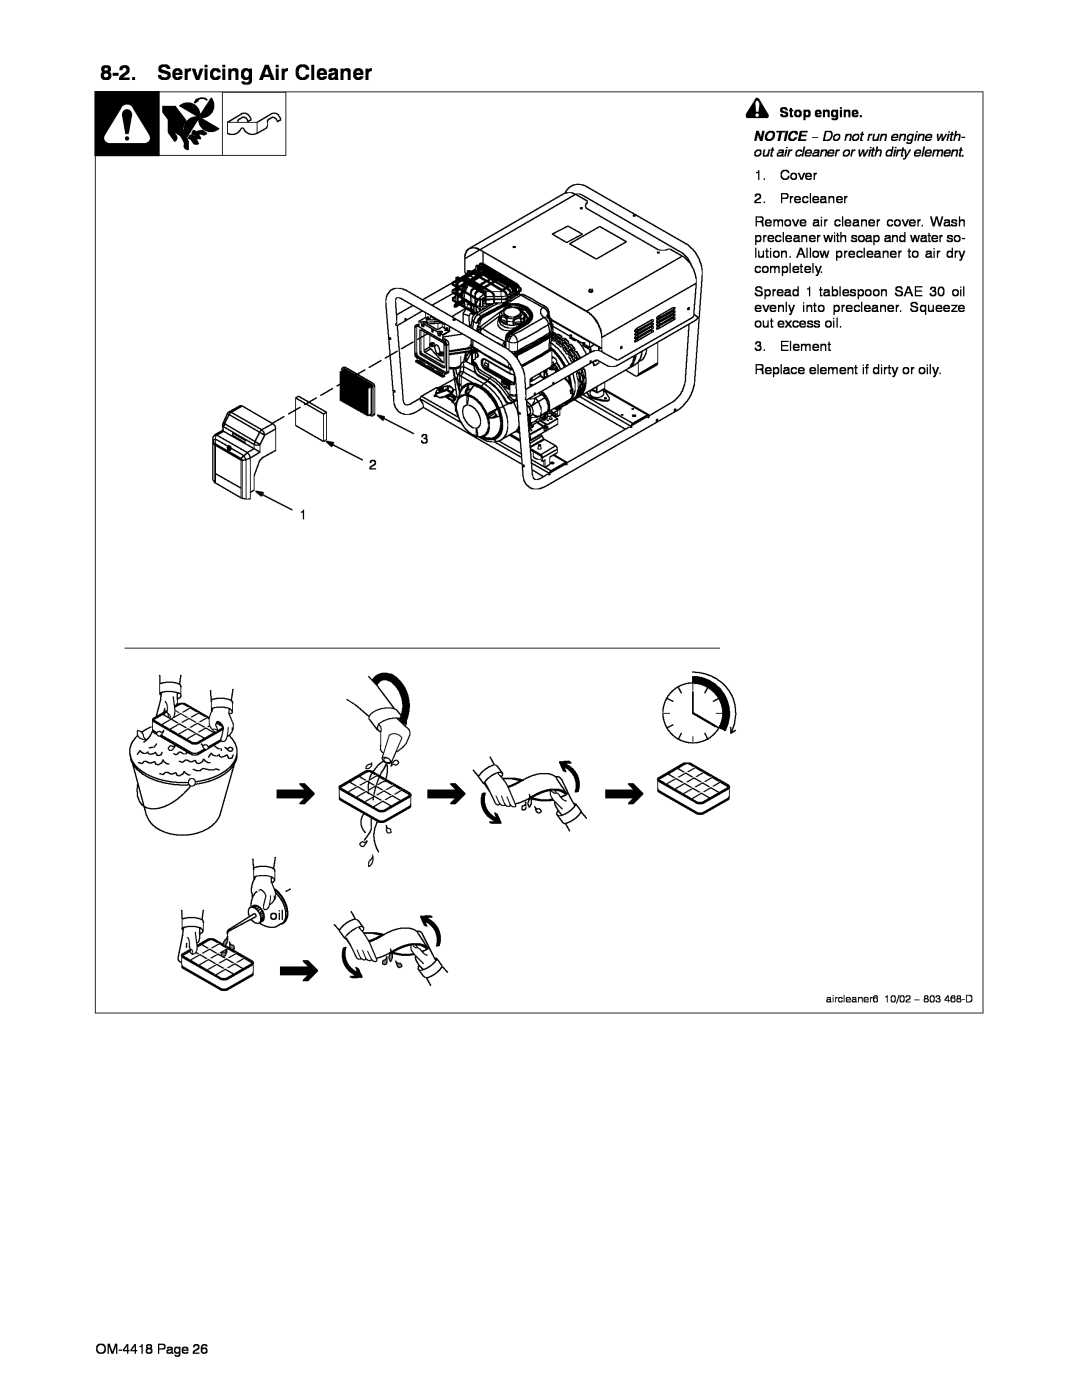 Hobart Welding Products 4500 manual Servicing Air Cleaner, Stop engine 